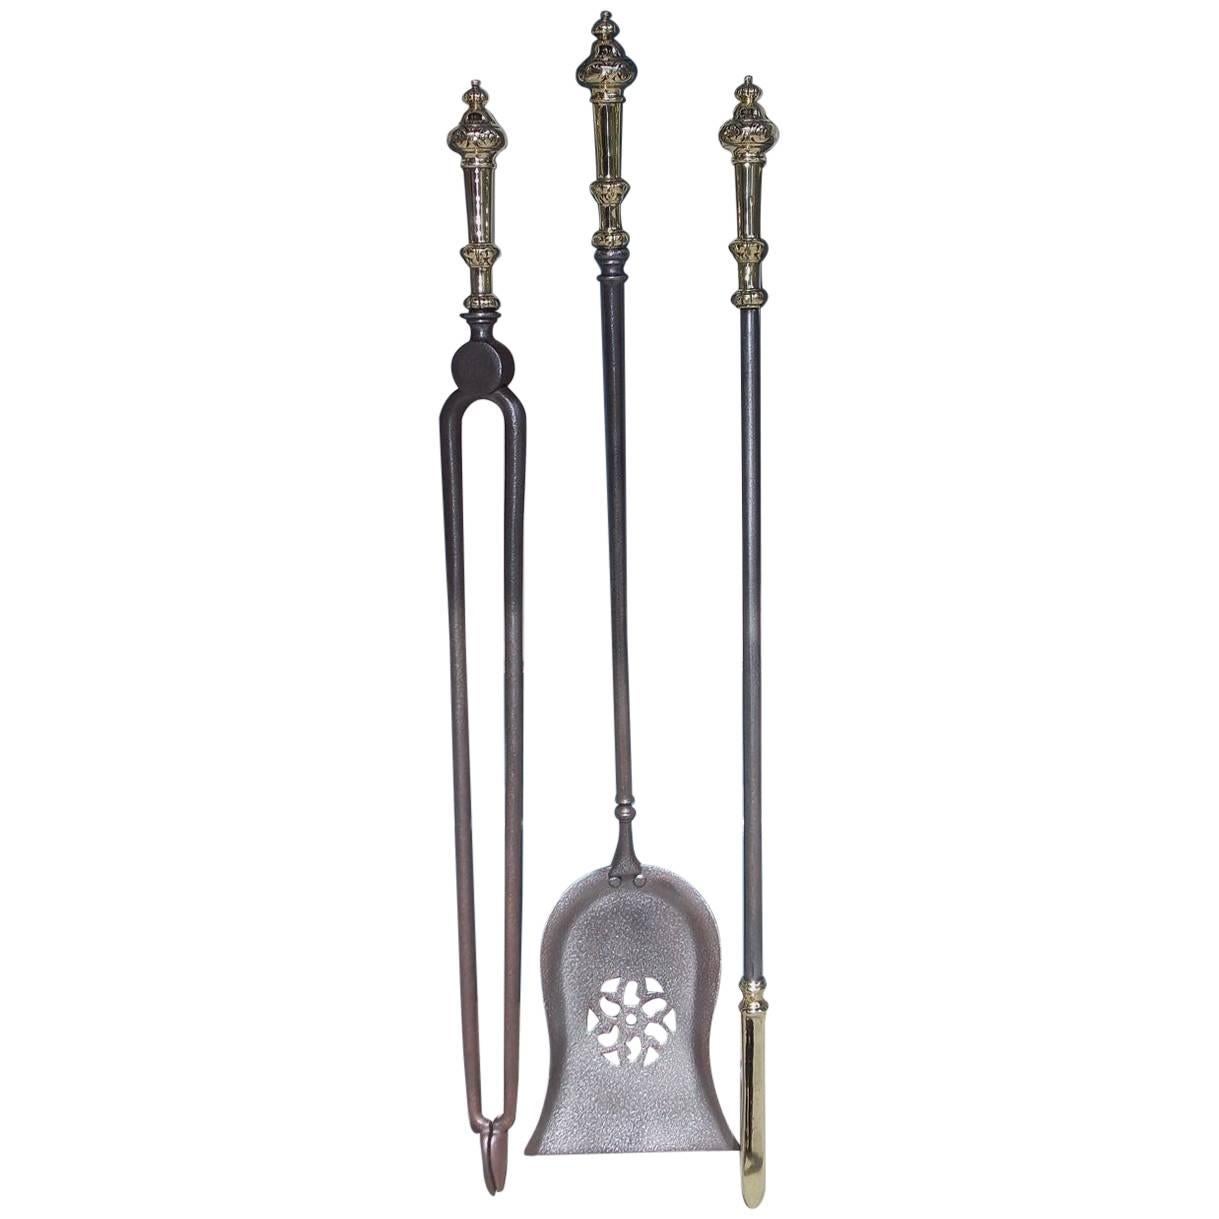 Set of Three English Polished Steel and Brass Fire Place Tools, Circa 1800